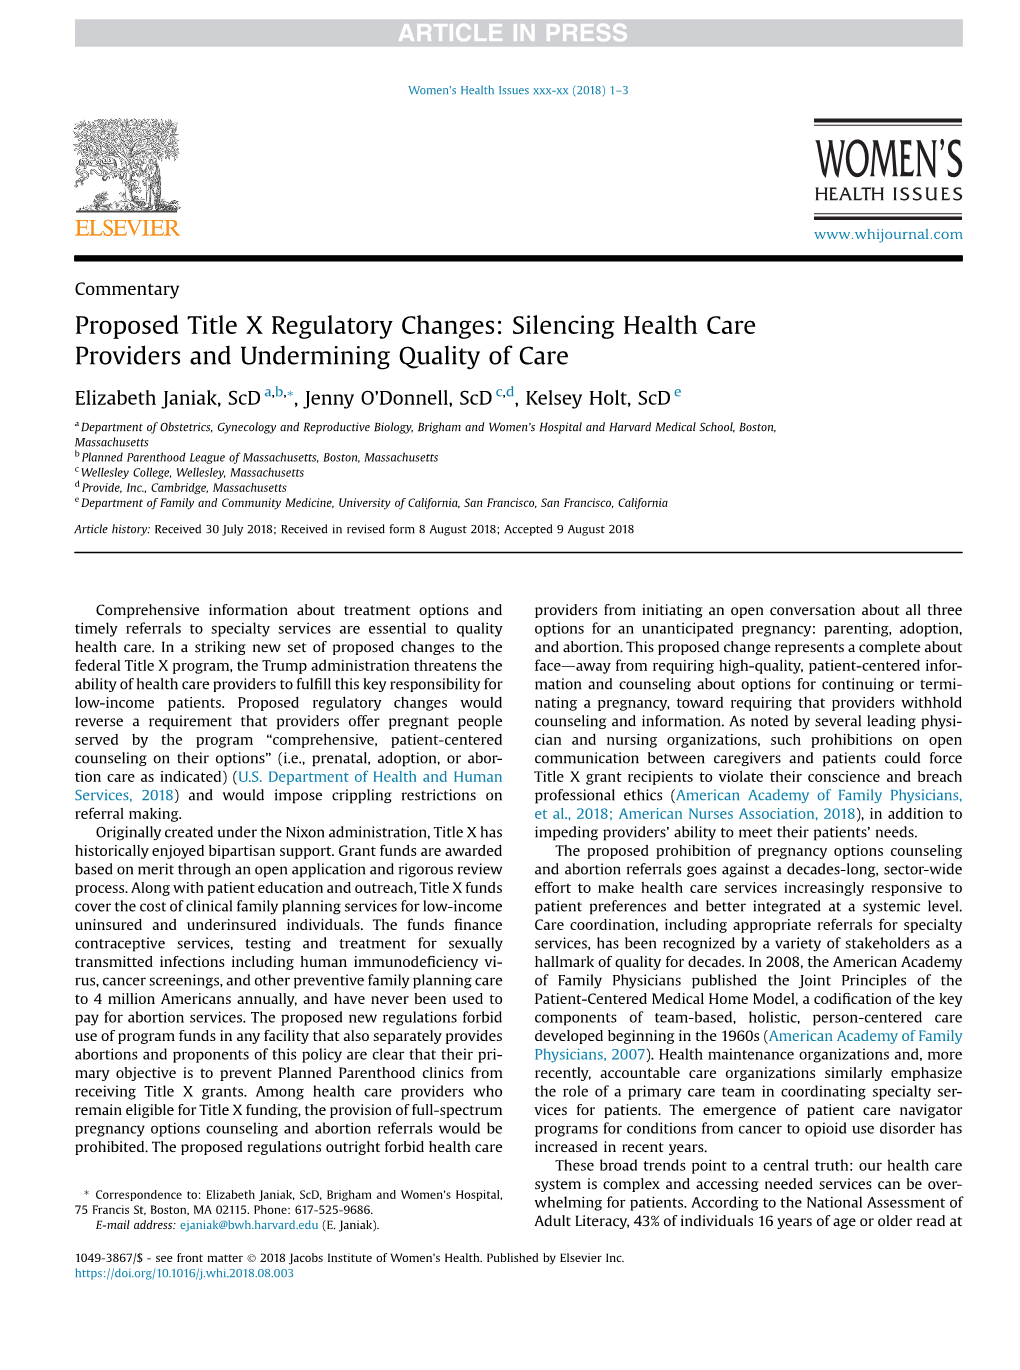 Proposed Title X Regulatory Changes: Silencing Health Care Providers and Undermining Quality of Care